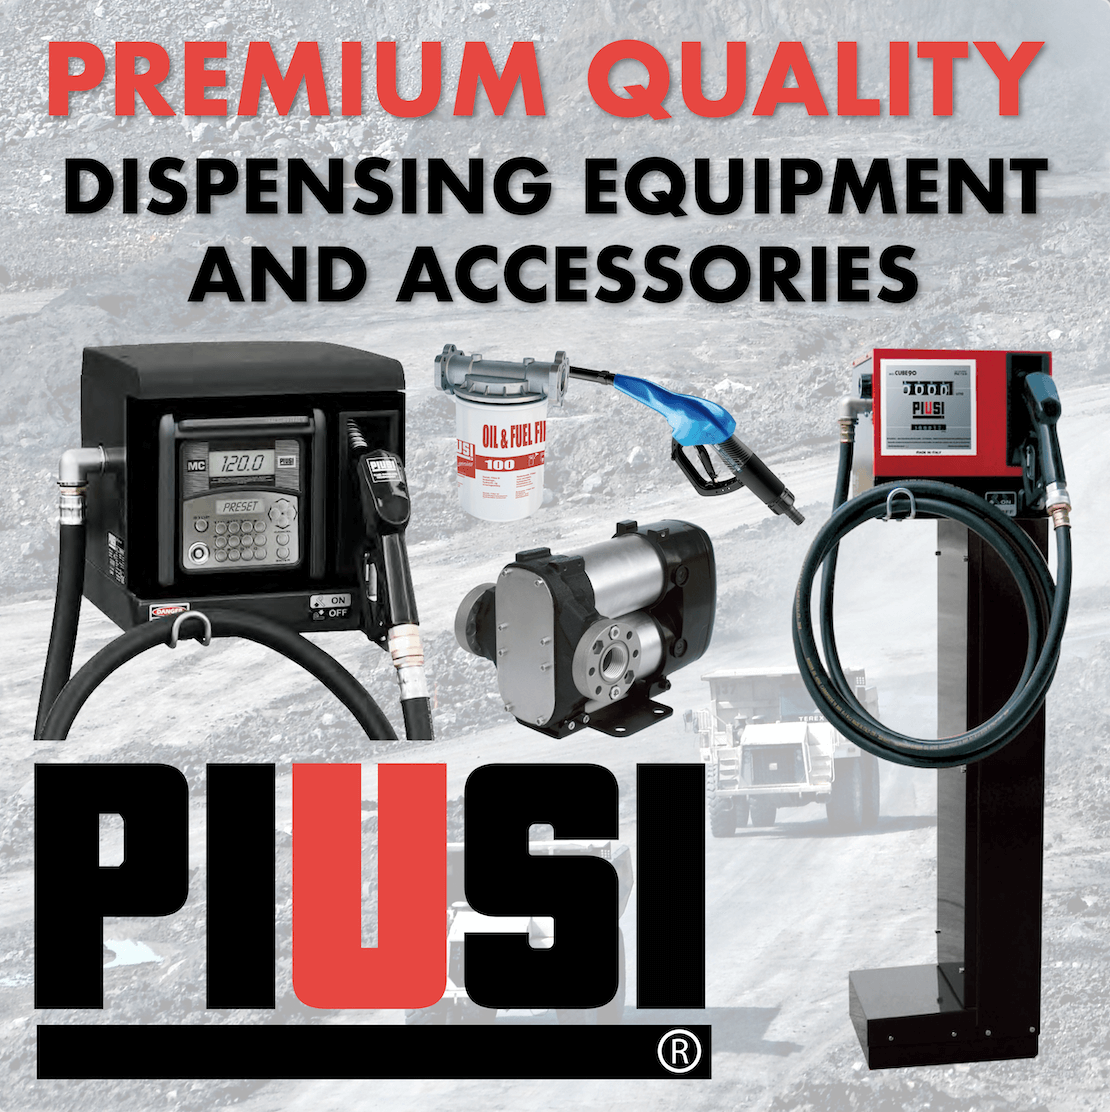 PIUSI solutions for transferring, refilling and measuring lubricants. fuels and liquids